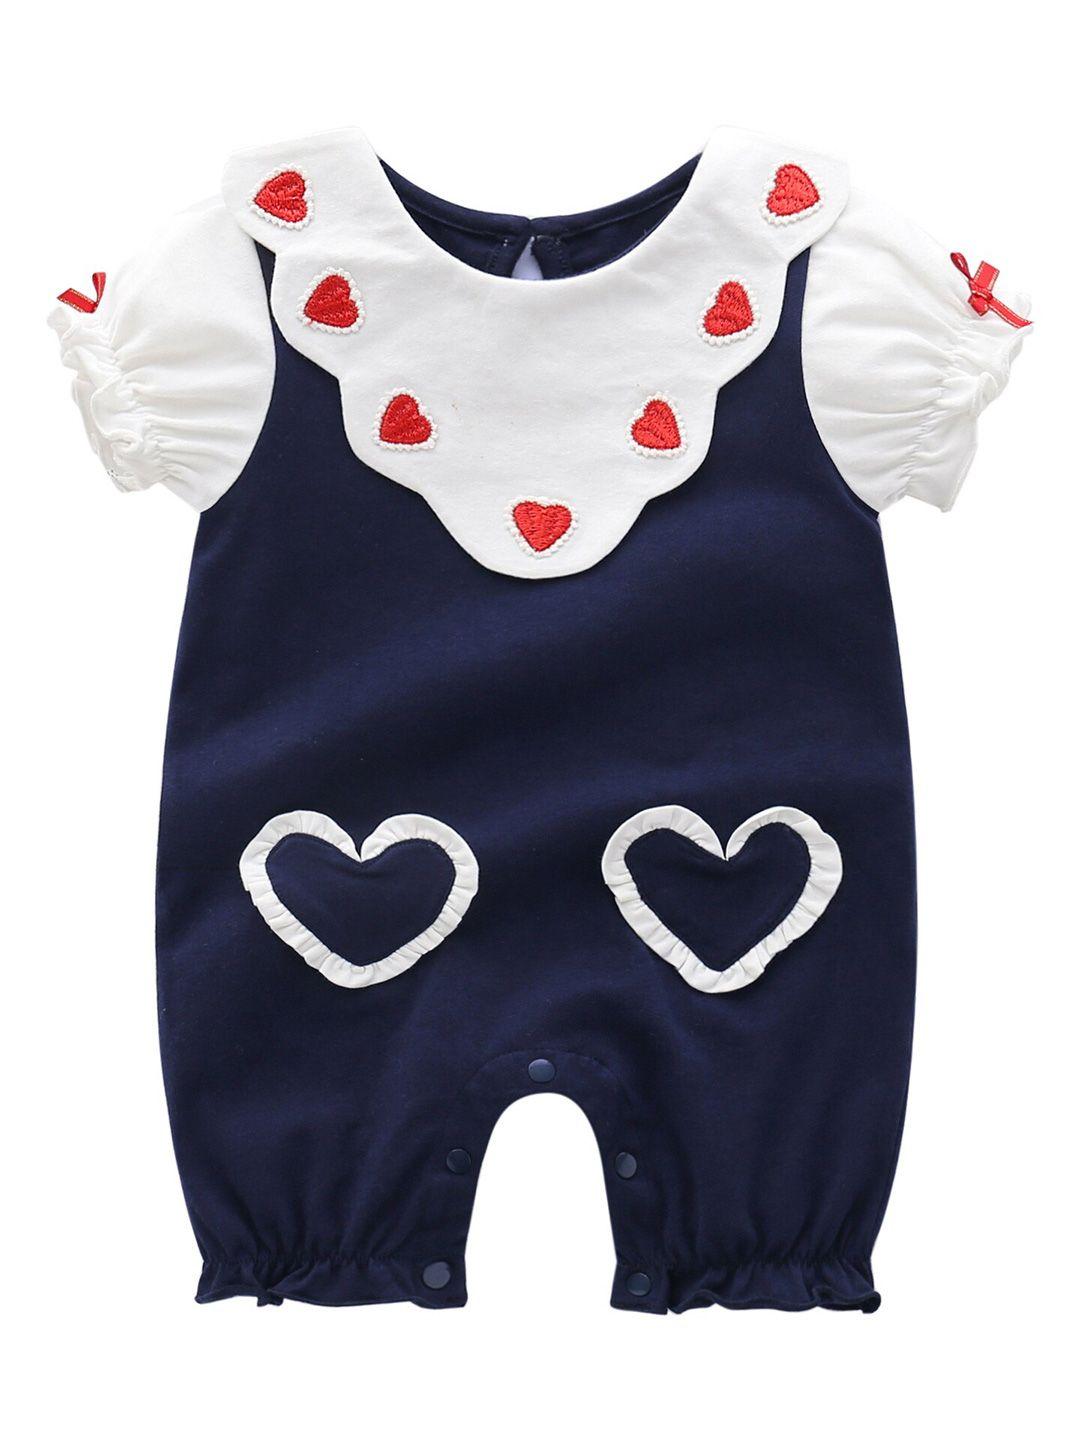 StyleCast Infant Girls Navy Blue Graphic Printed Pure Cotton Romper